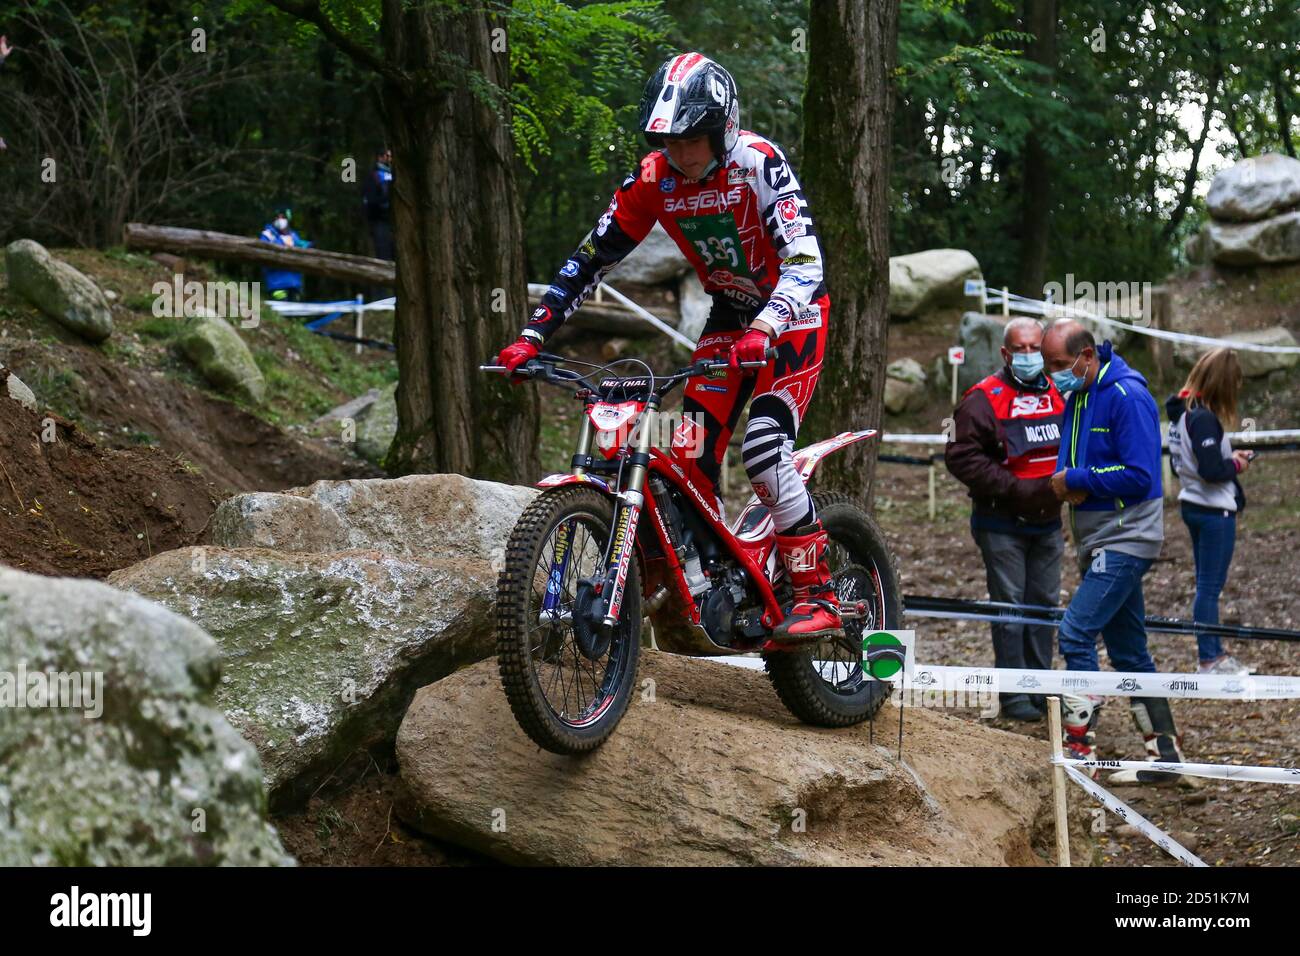 Jack Dance (Gas Gas / trial 125) during the Hertz FIM Trial World  Championship (round 4) at Moto Club Lazzate circuit on October 11, 2020 in  Lazzate Stock Photo - Alamy